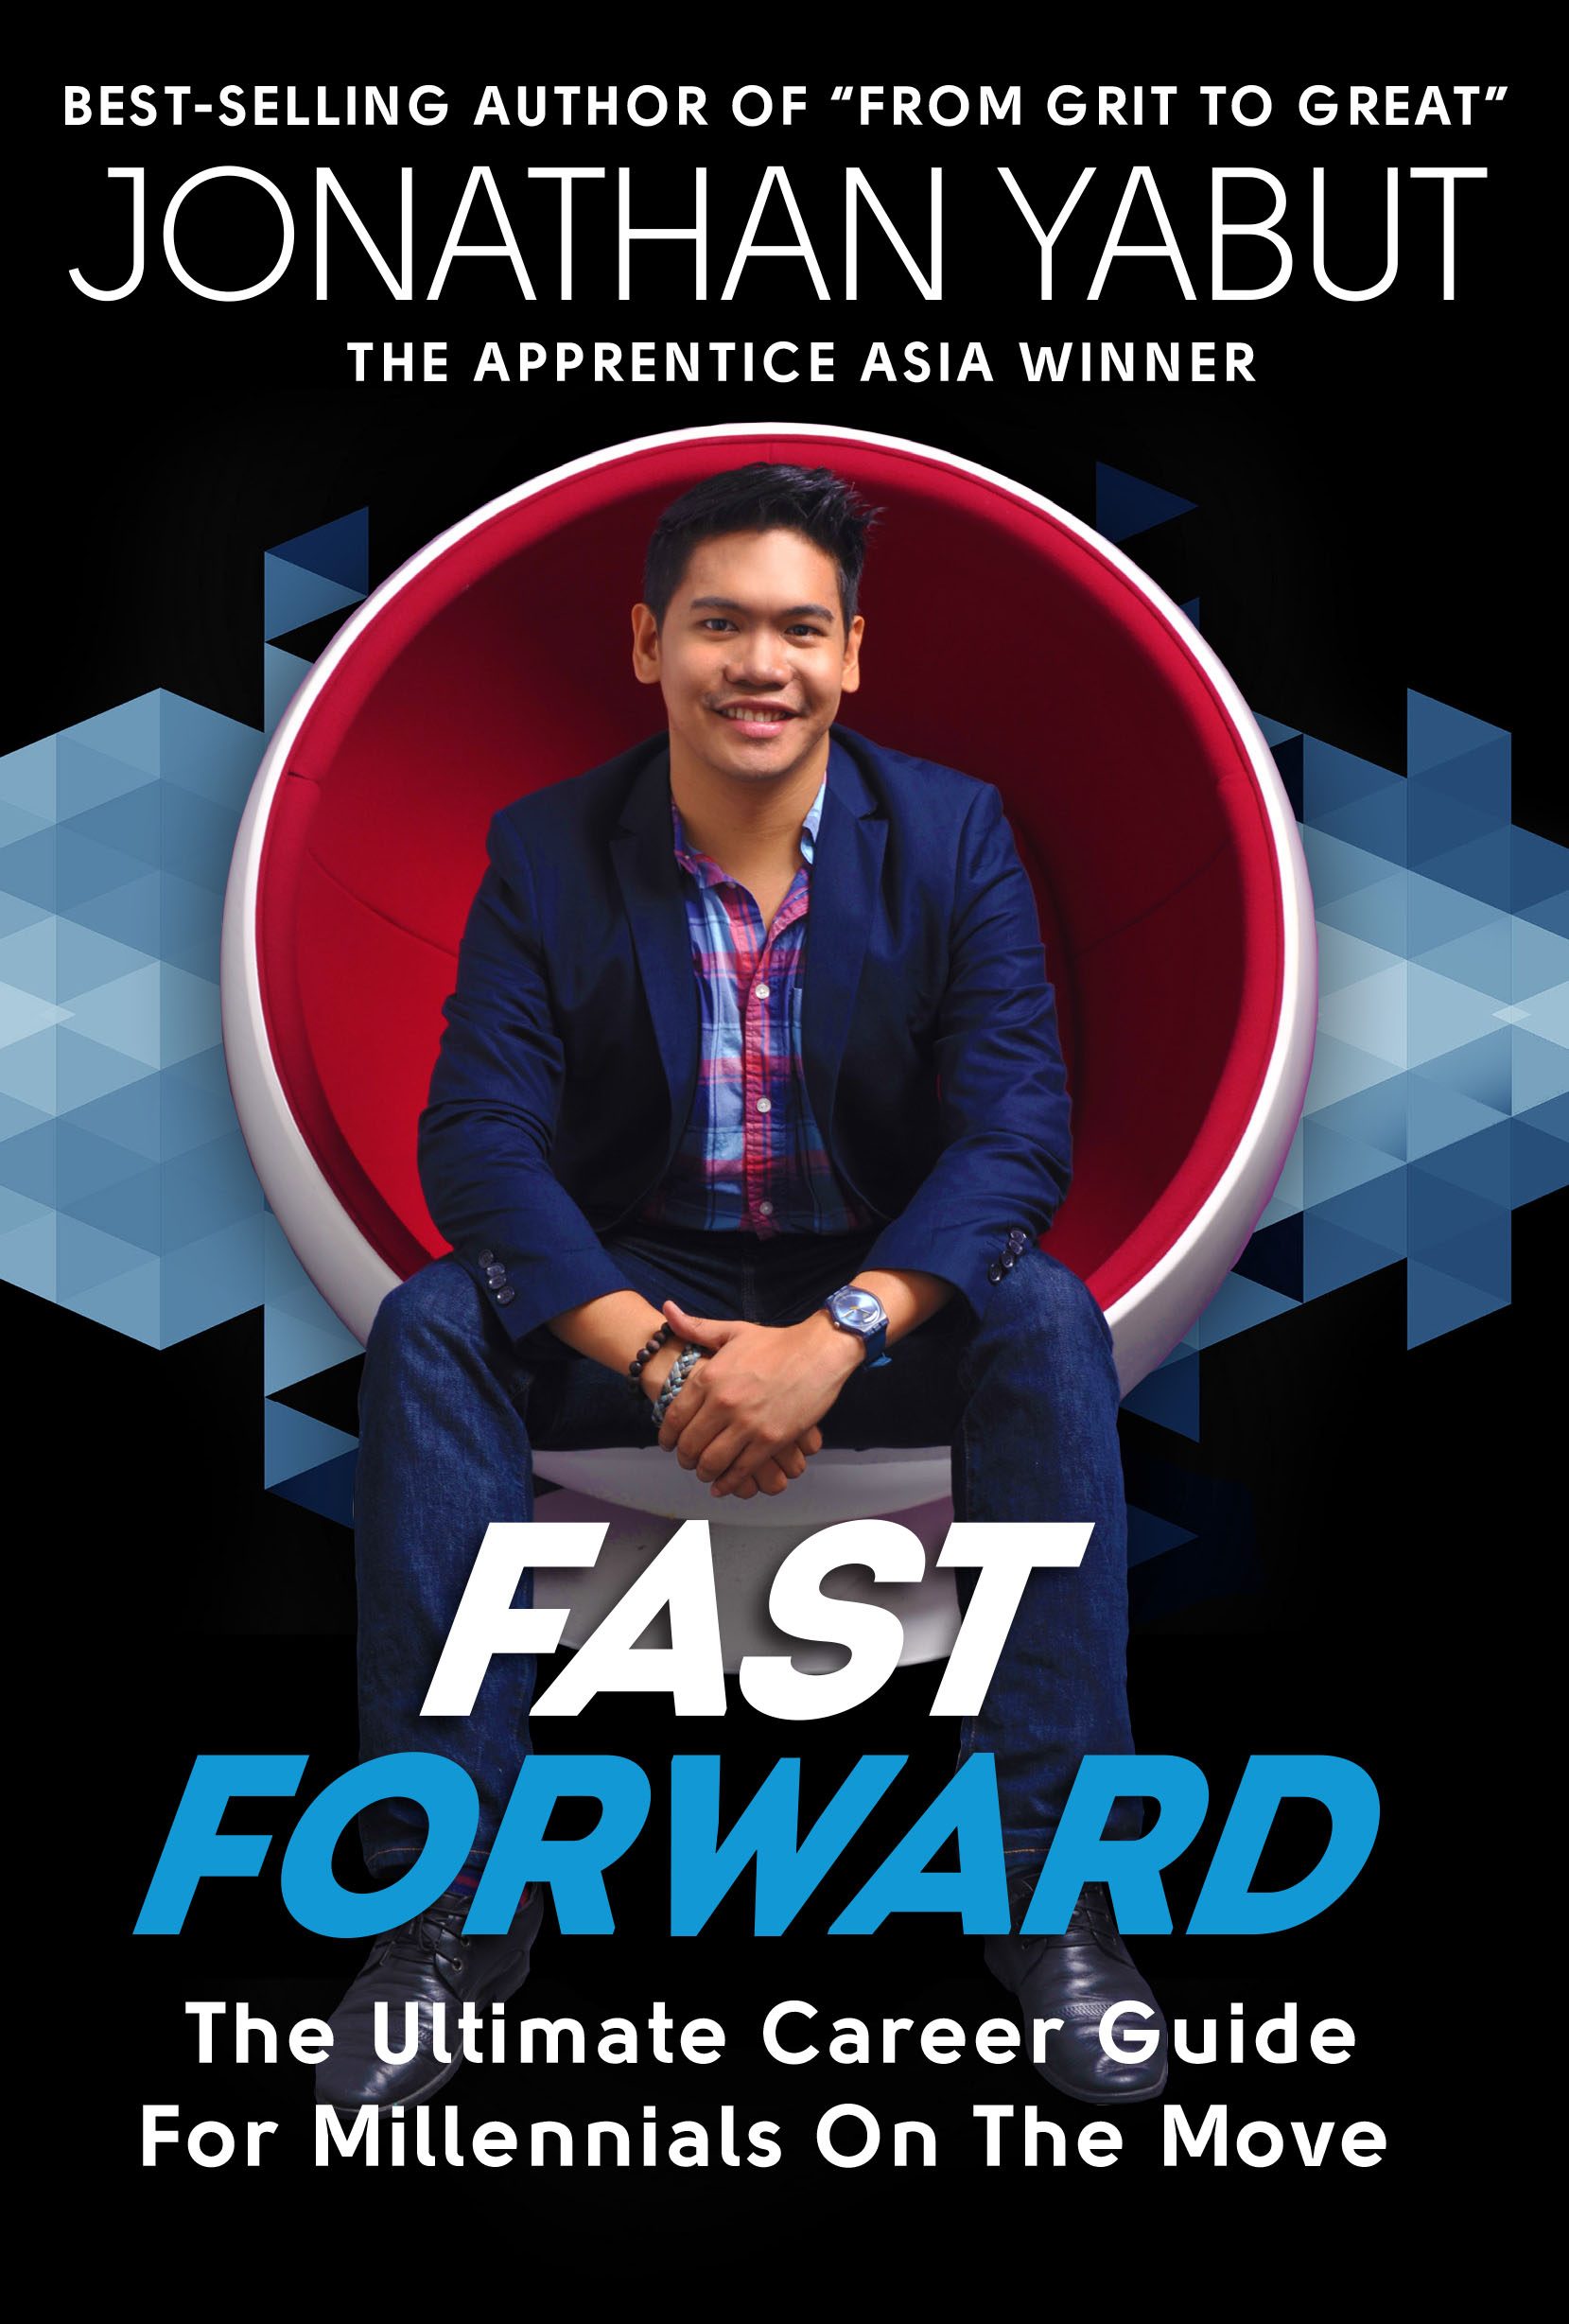 For more career tips and stories, grab a copy of Jonathan Yabut's latest book, 'Fast Forward: The Ultimate Career Guide for Millennials On The Move,' available in all bookstores in Asia December 2016.  